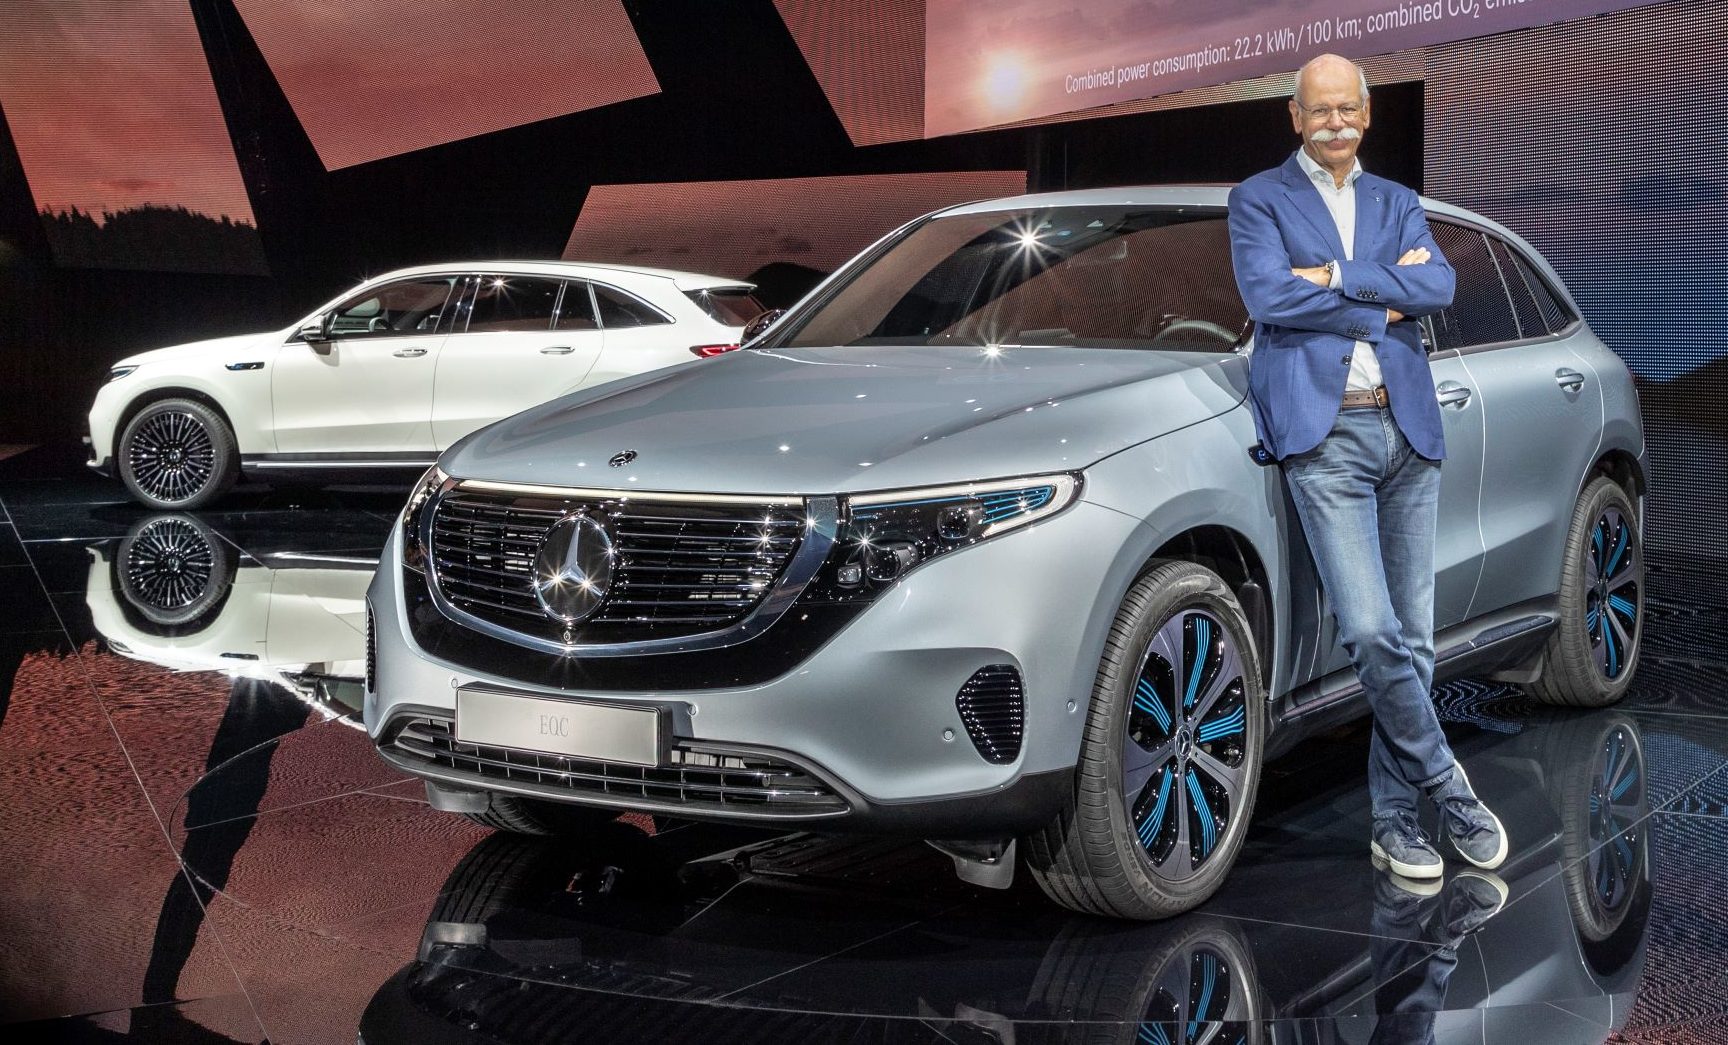 Once-hailed ‘Tesla Killer’ Mercedes-Benz EQC sells less than 700 since launch: report